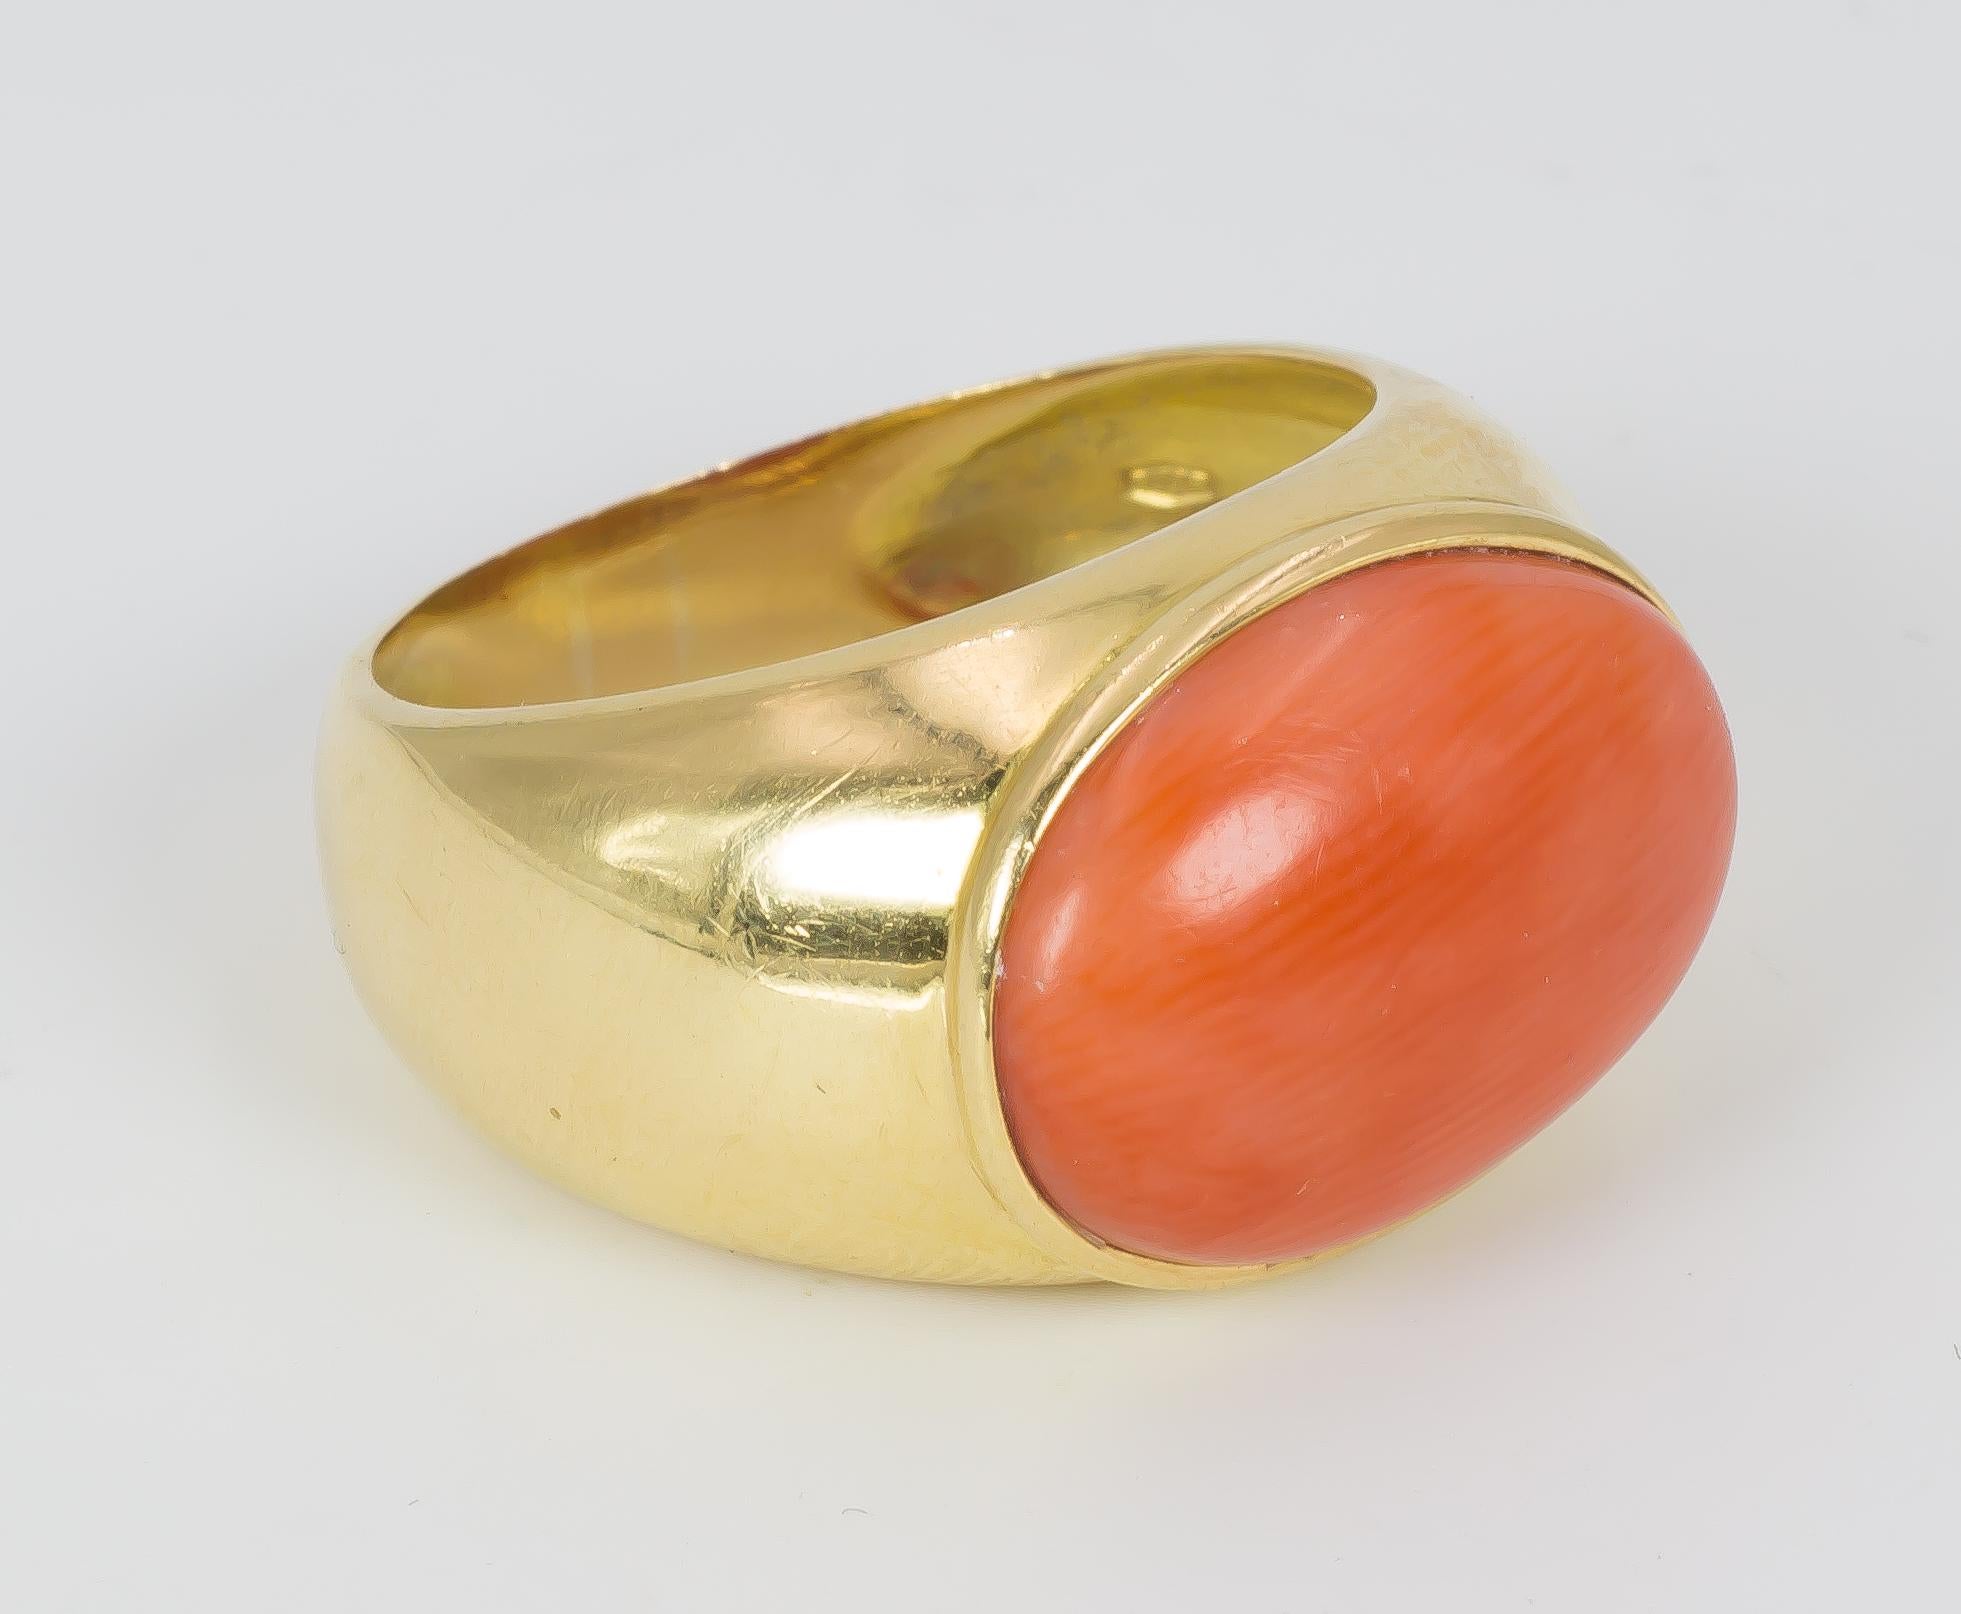 An elegant vintage ring, dating from the 1950s, and set with a beautiful central and oval orange coral in a gold setting.

MATERIALS
Gold and orange coral

RING SIZE
7 US (resizable)